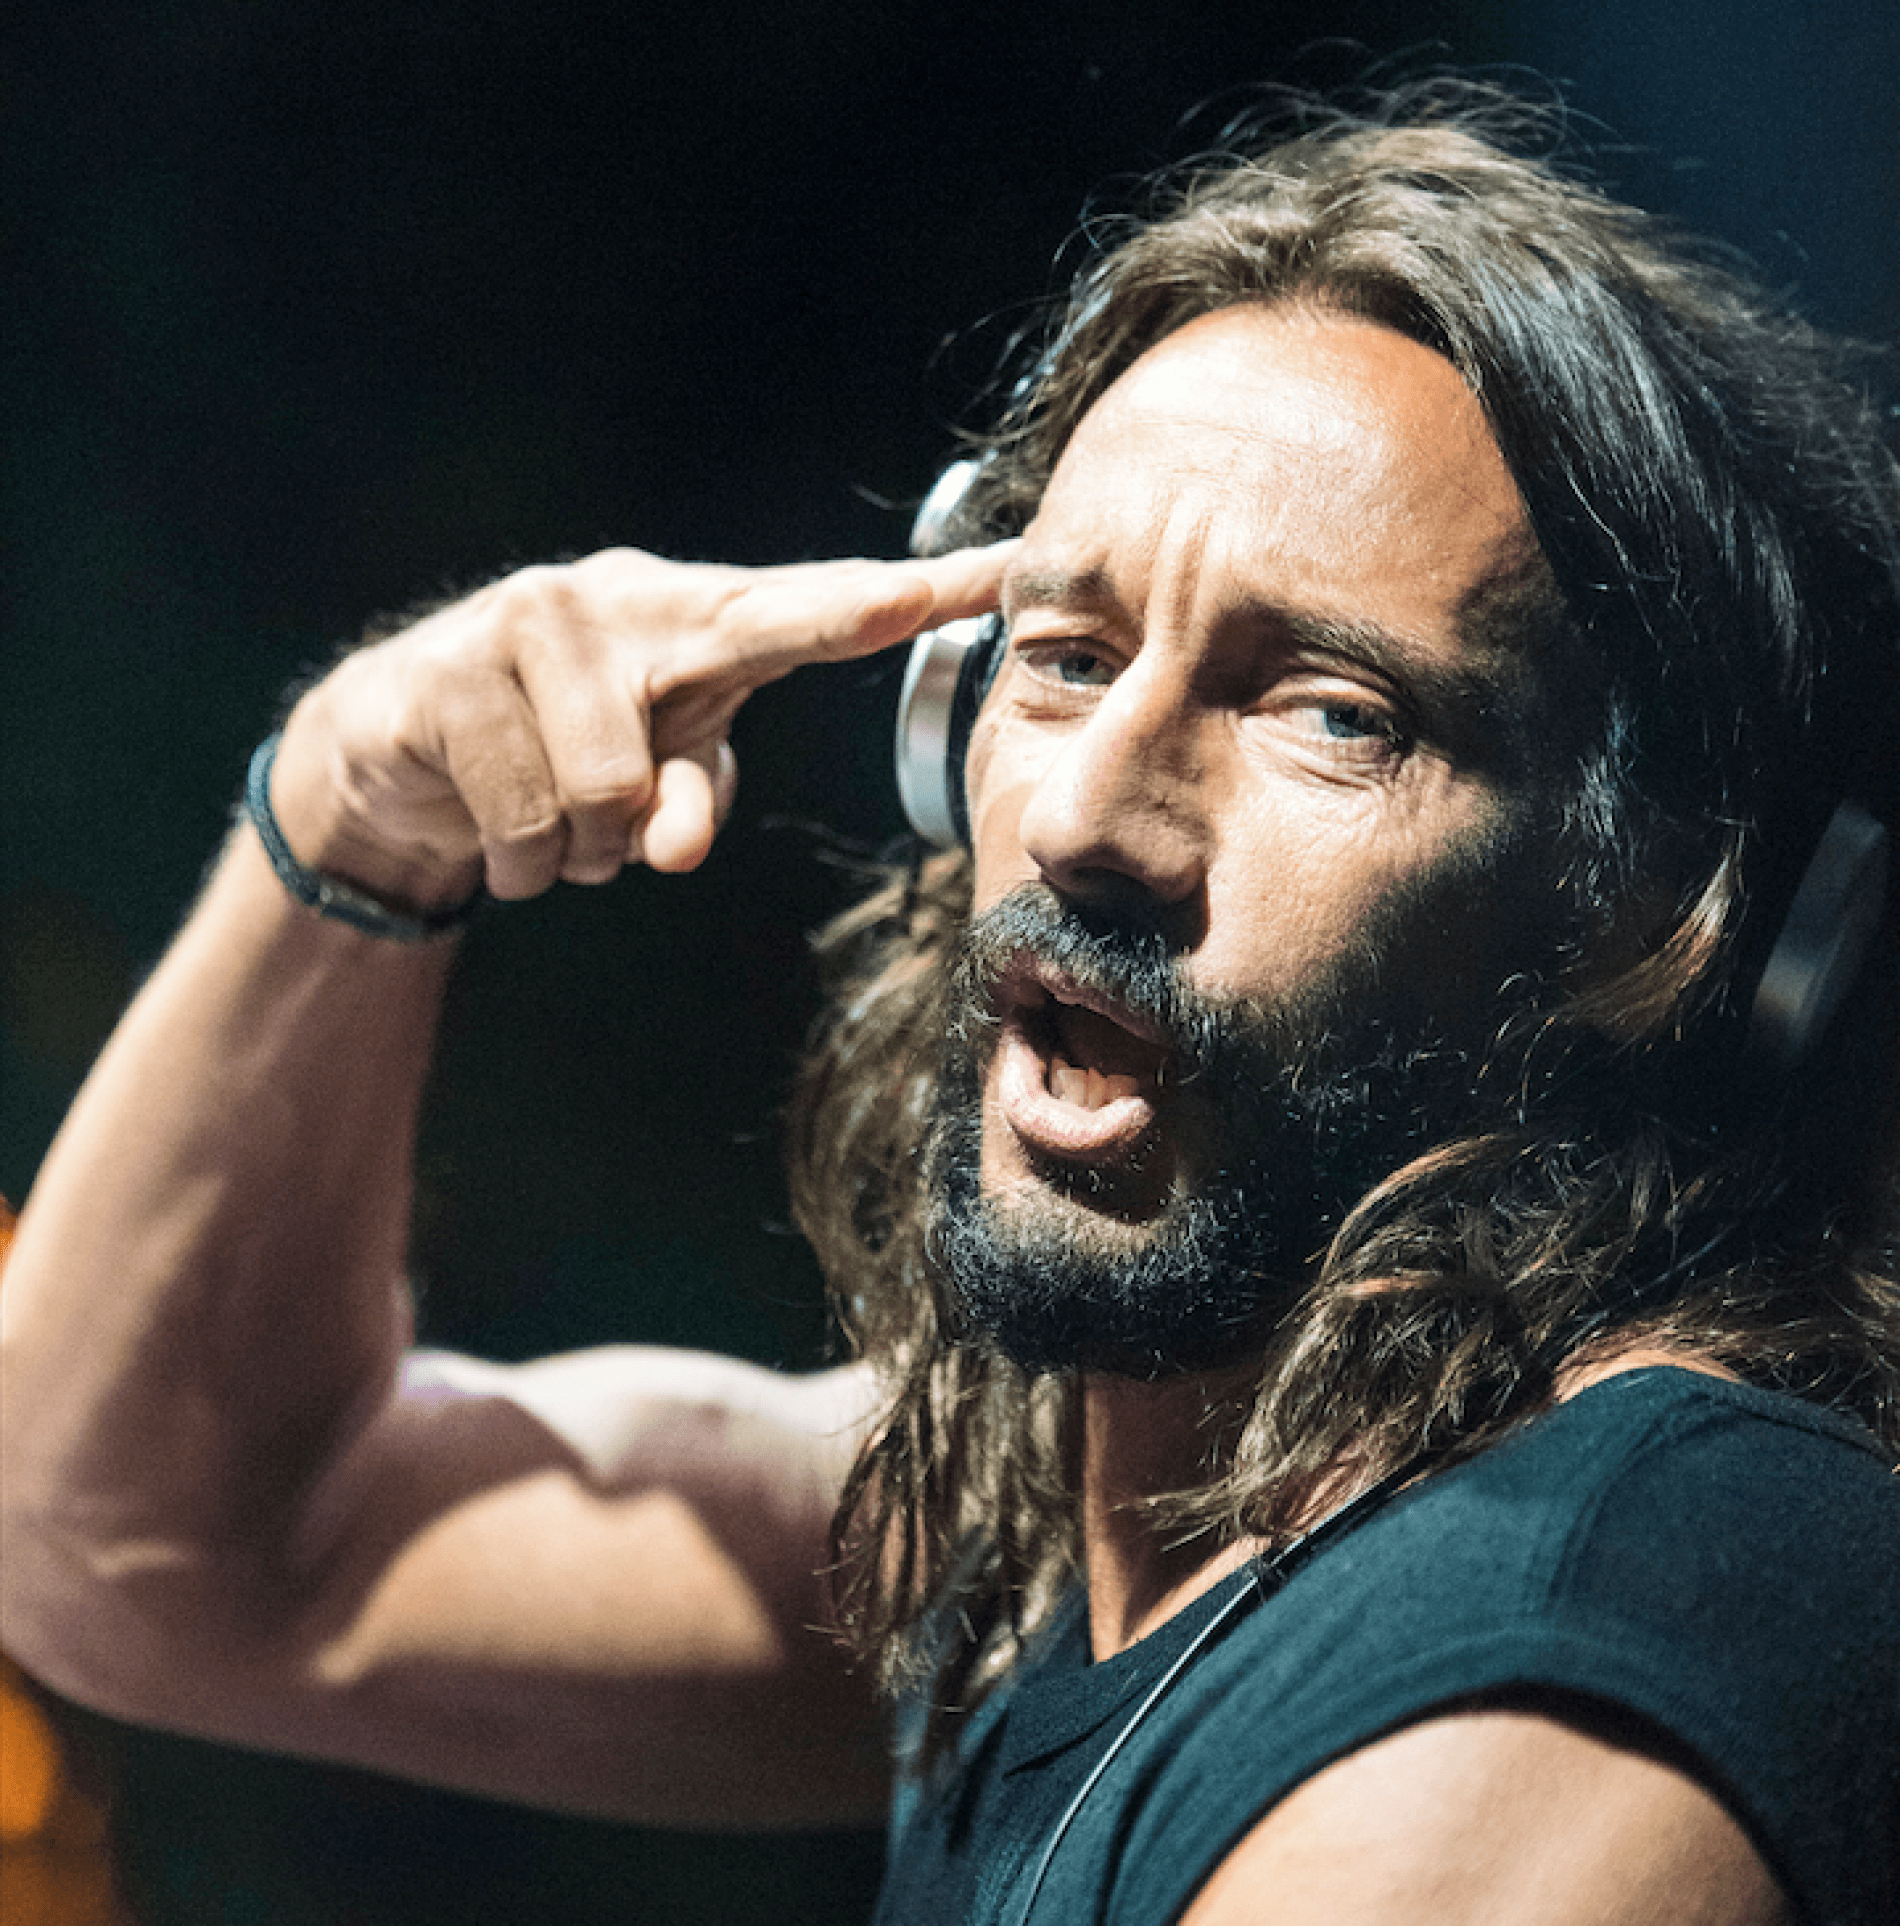 Bob Sinclar & Daddy's Groove are mixing it up